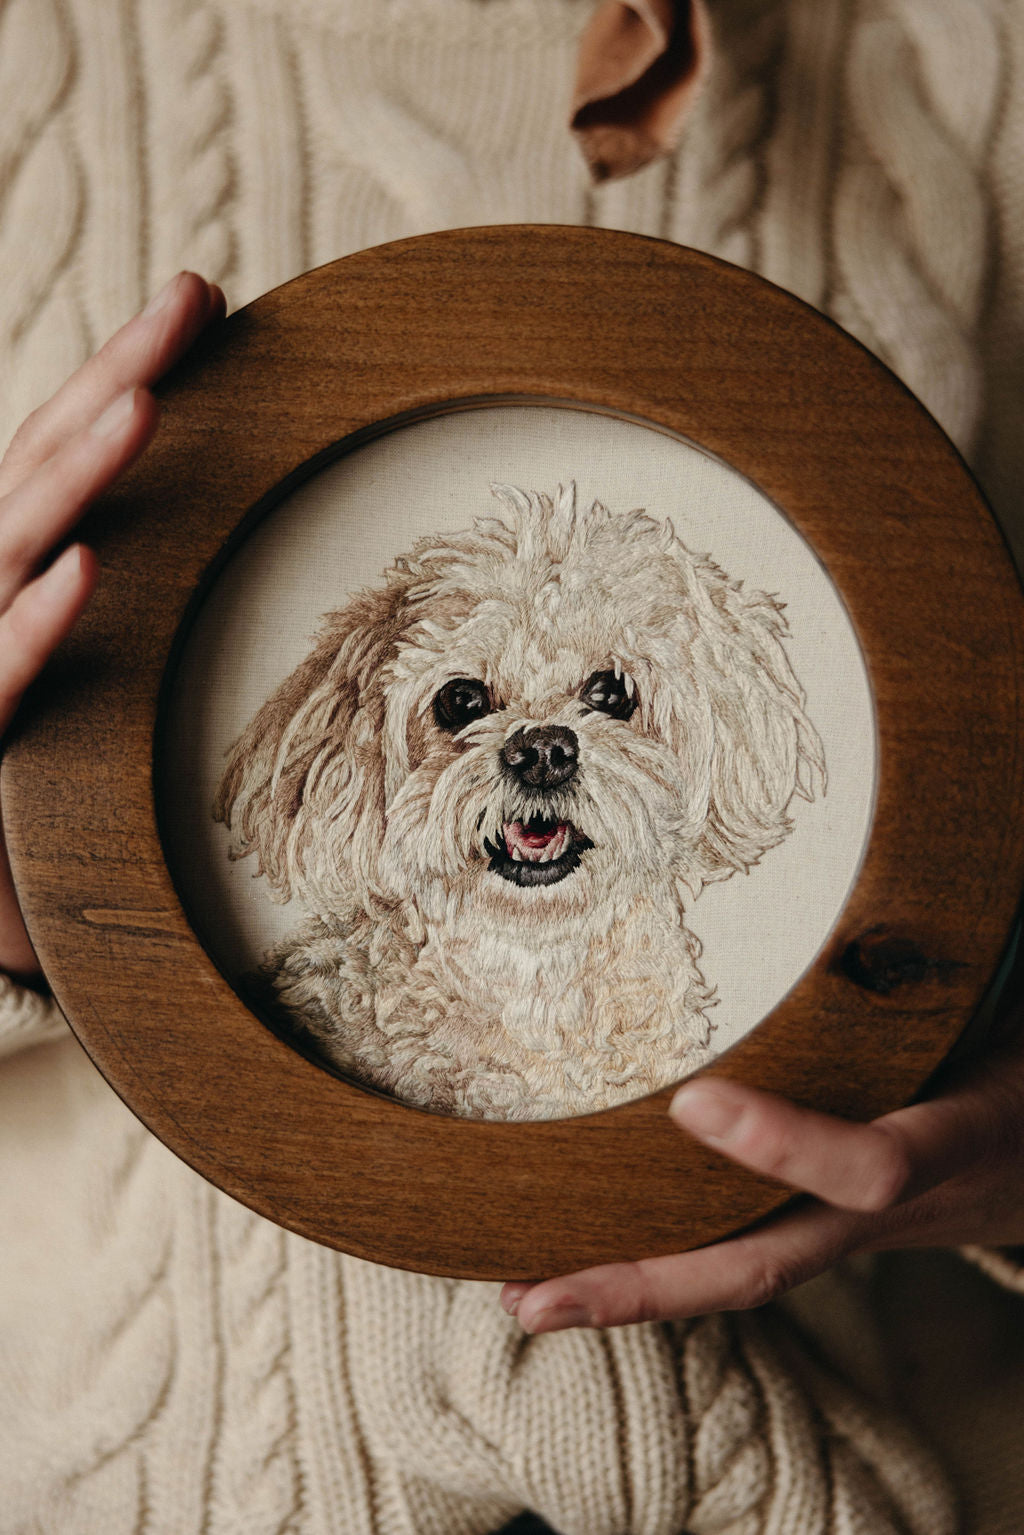 Embroidered portrait of a small white curly haired dog in a round walnut frame held by caucasian hands against a knitted white sweater